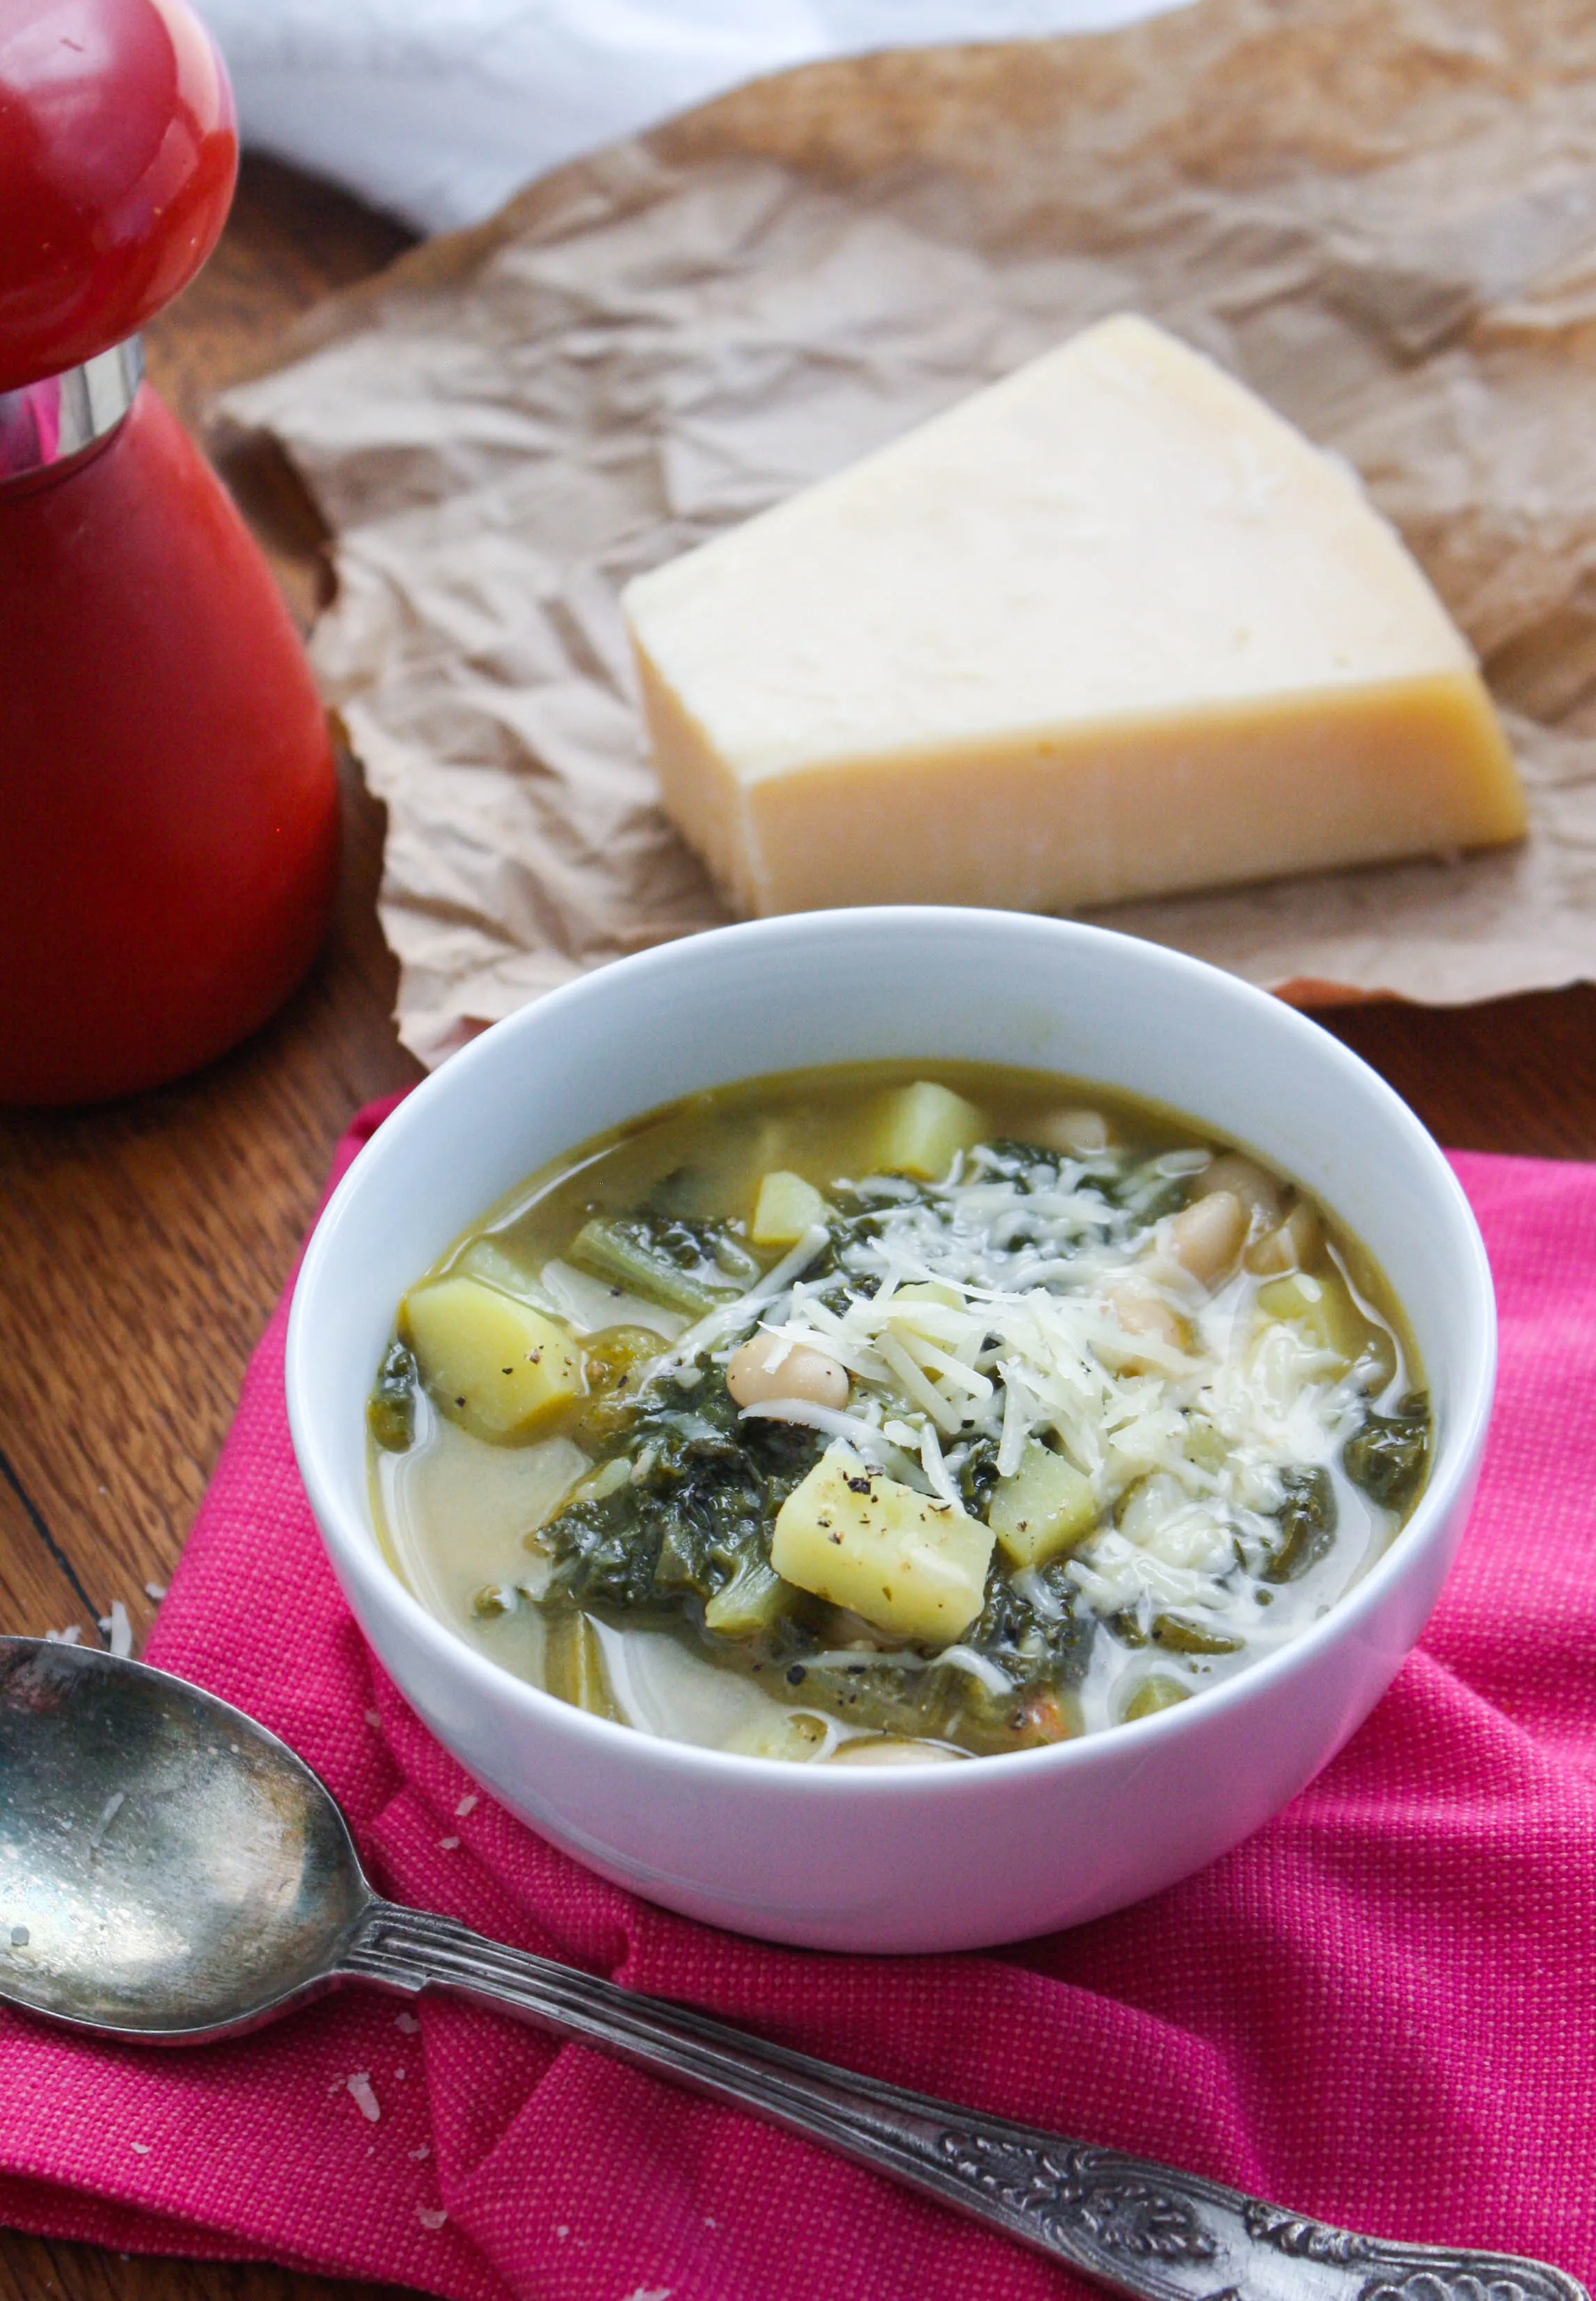 Hearty Escarole Soup with Pancetta is a tasty and hearty soup for any night of the week. Sprinkle some Parmesan cheese over the top of this soup for part of a lovely meal.